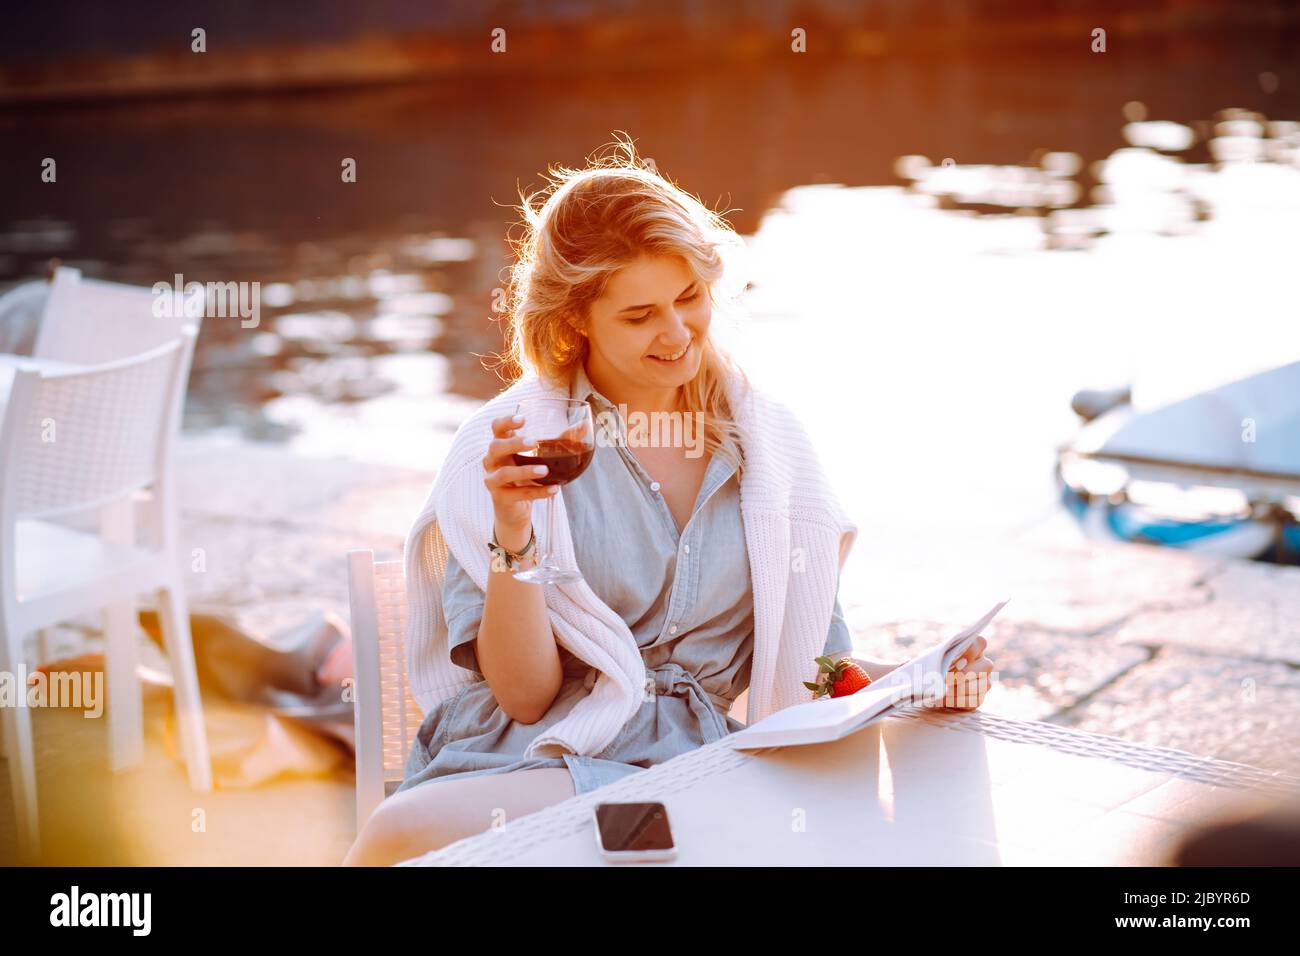 Young smiling attractive woman sitting at table, holding glass of red wine, reading book on embankment at sunset. Stock Photo